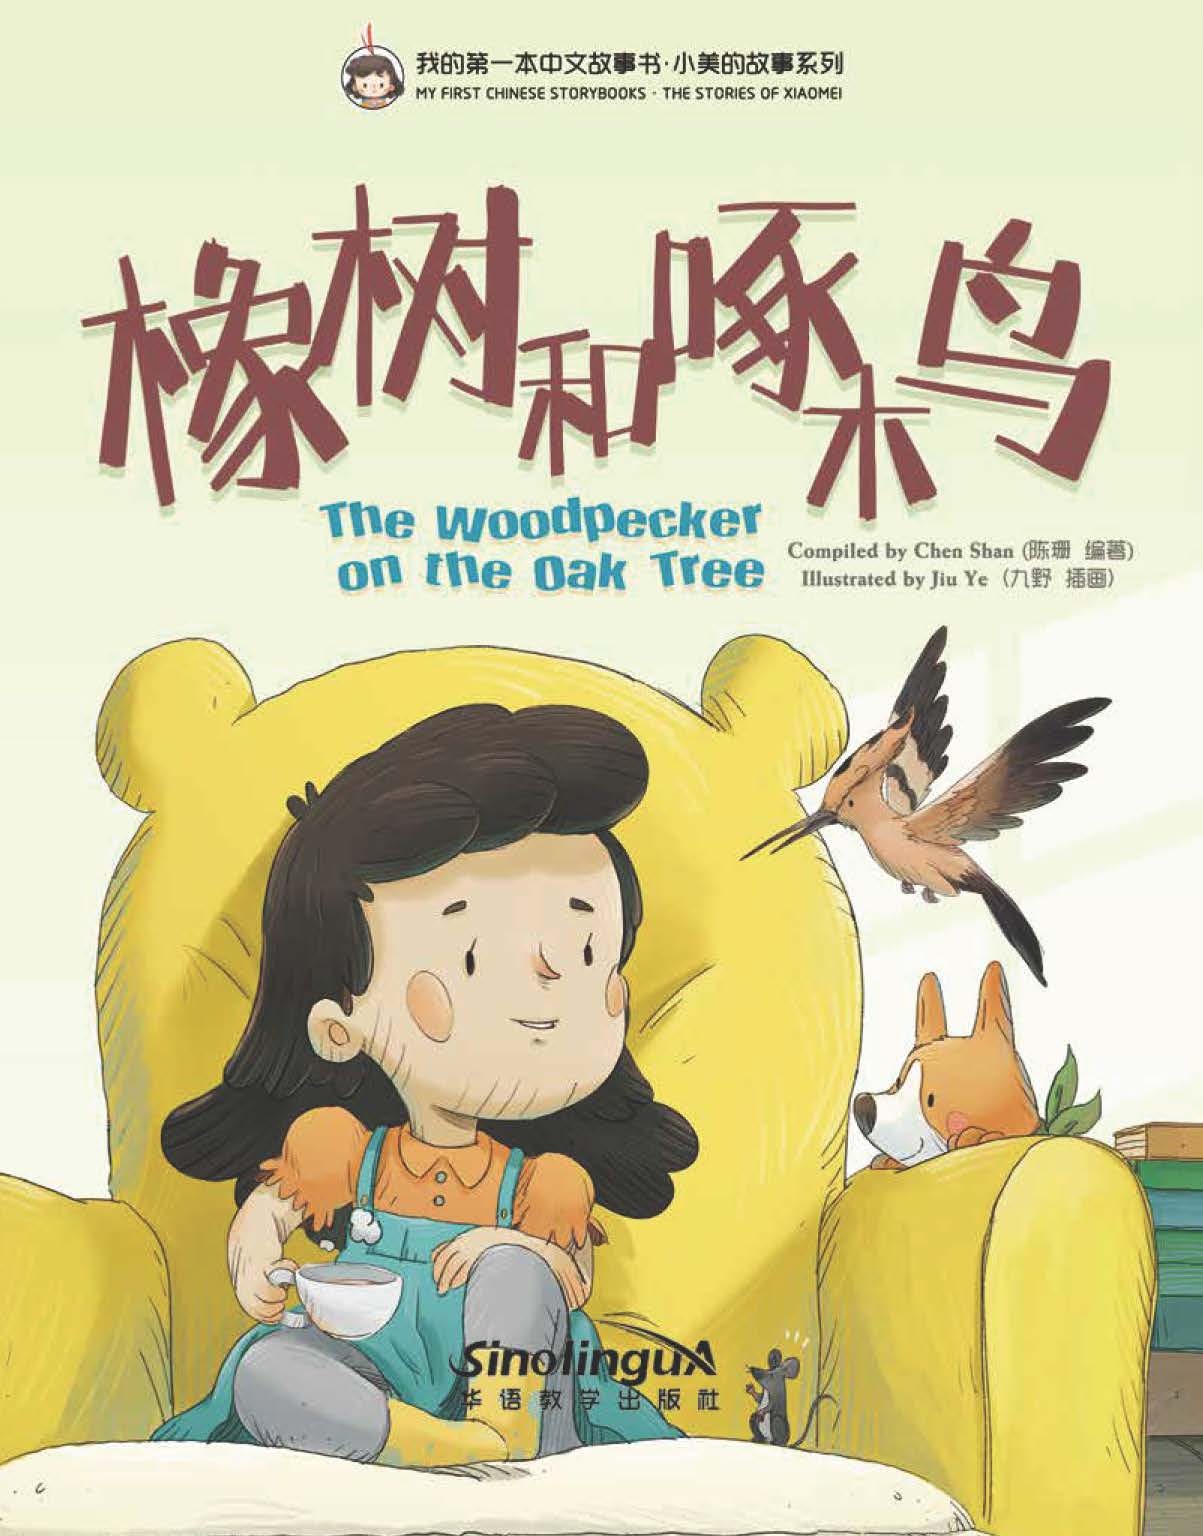 My First Chinese Storybooks-The Stories of Xiaomei<The woodpecker on the Oak Tree>